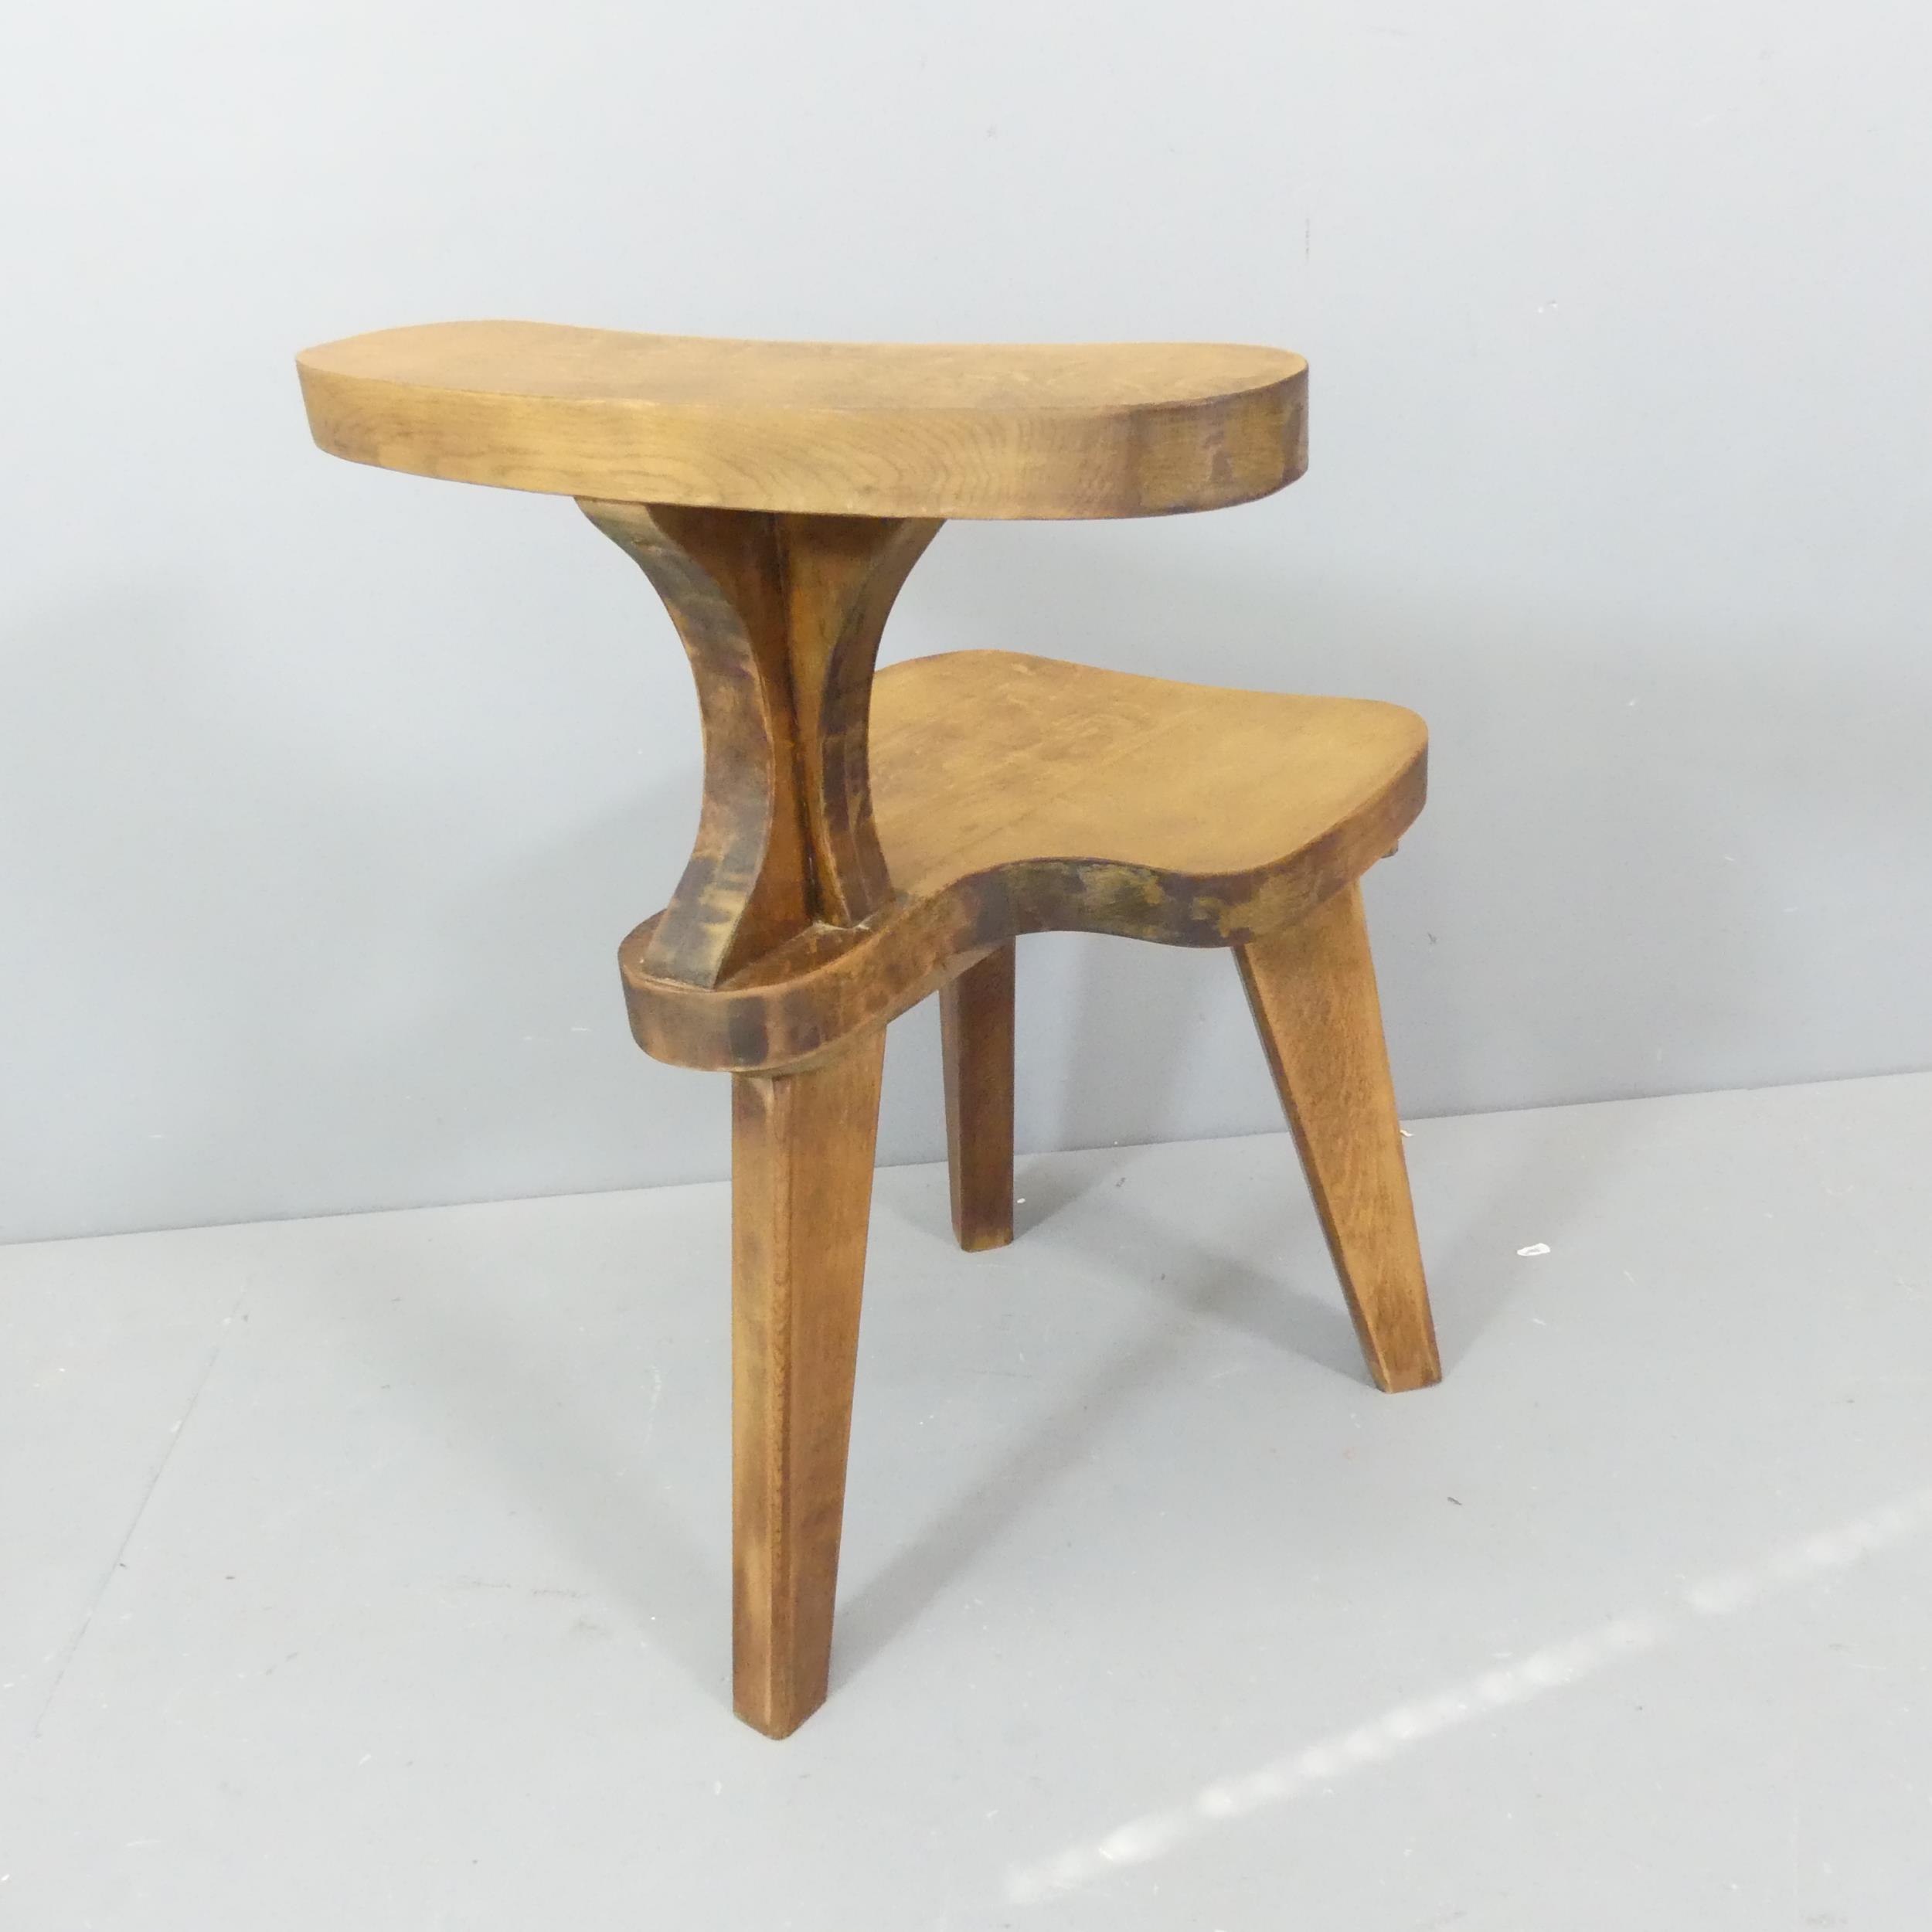 A 1960s French oak brutalist smoking or reading chair. - Image 2 of 2